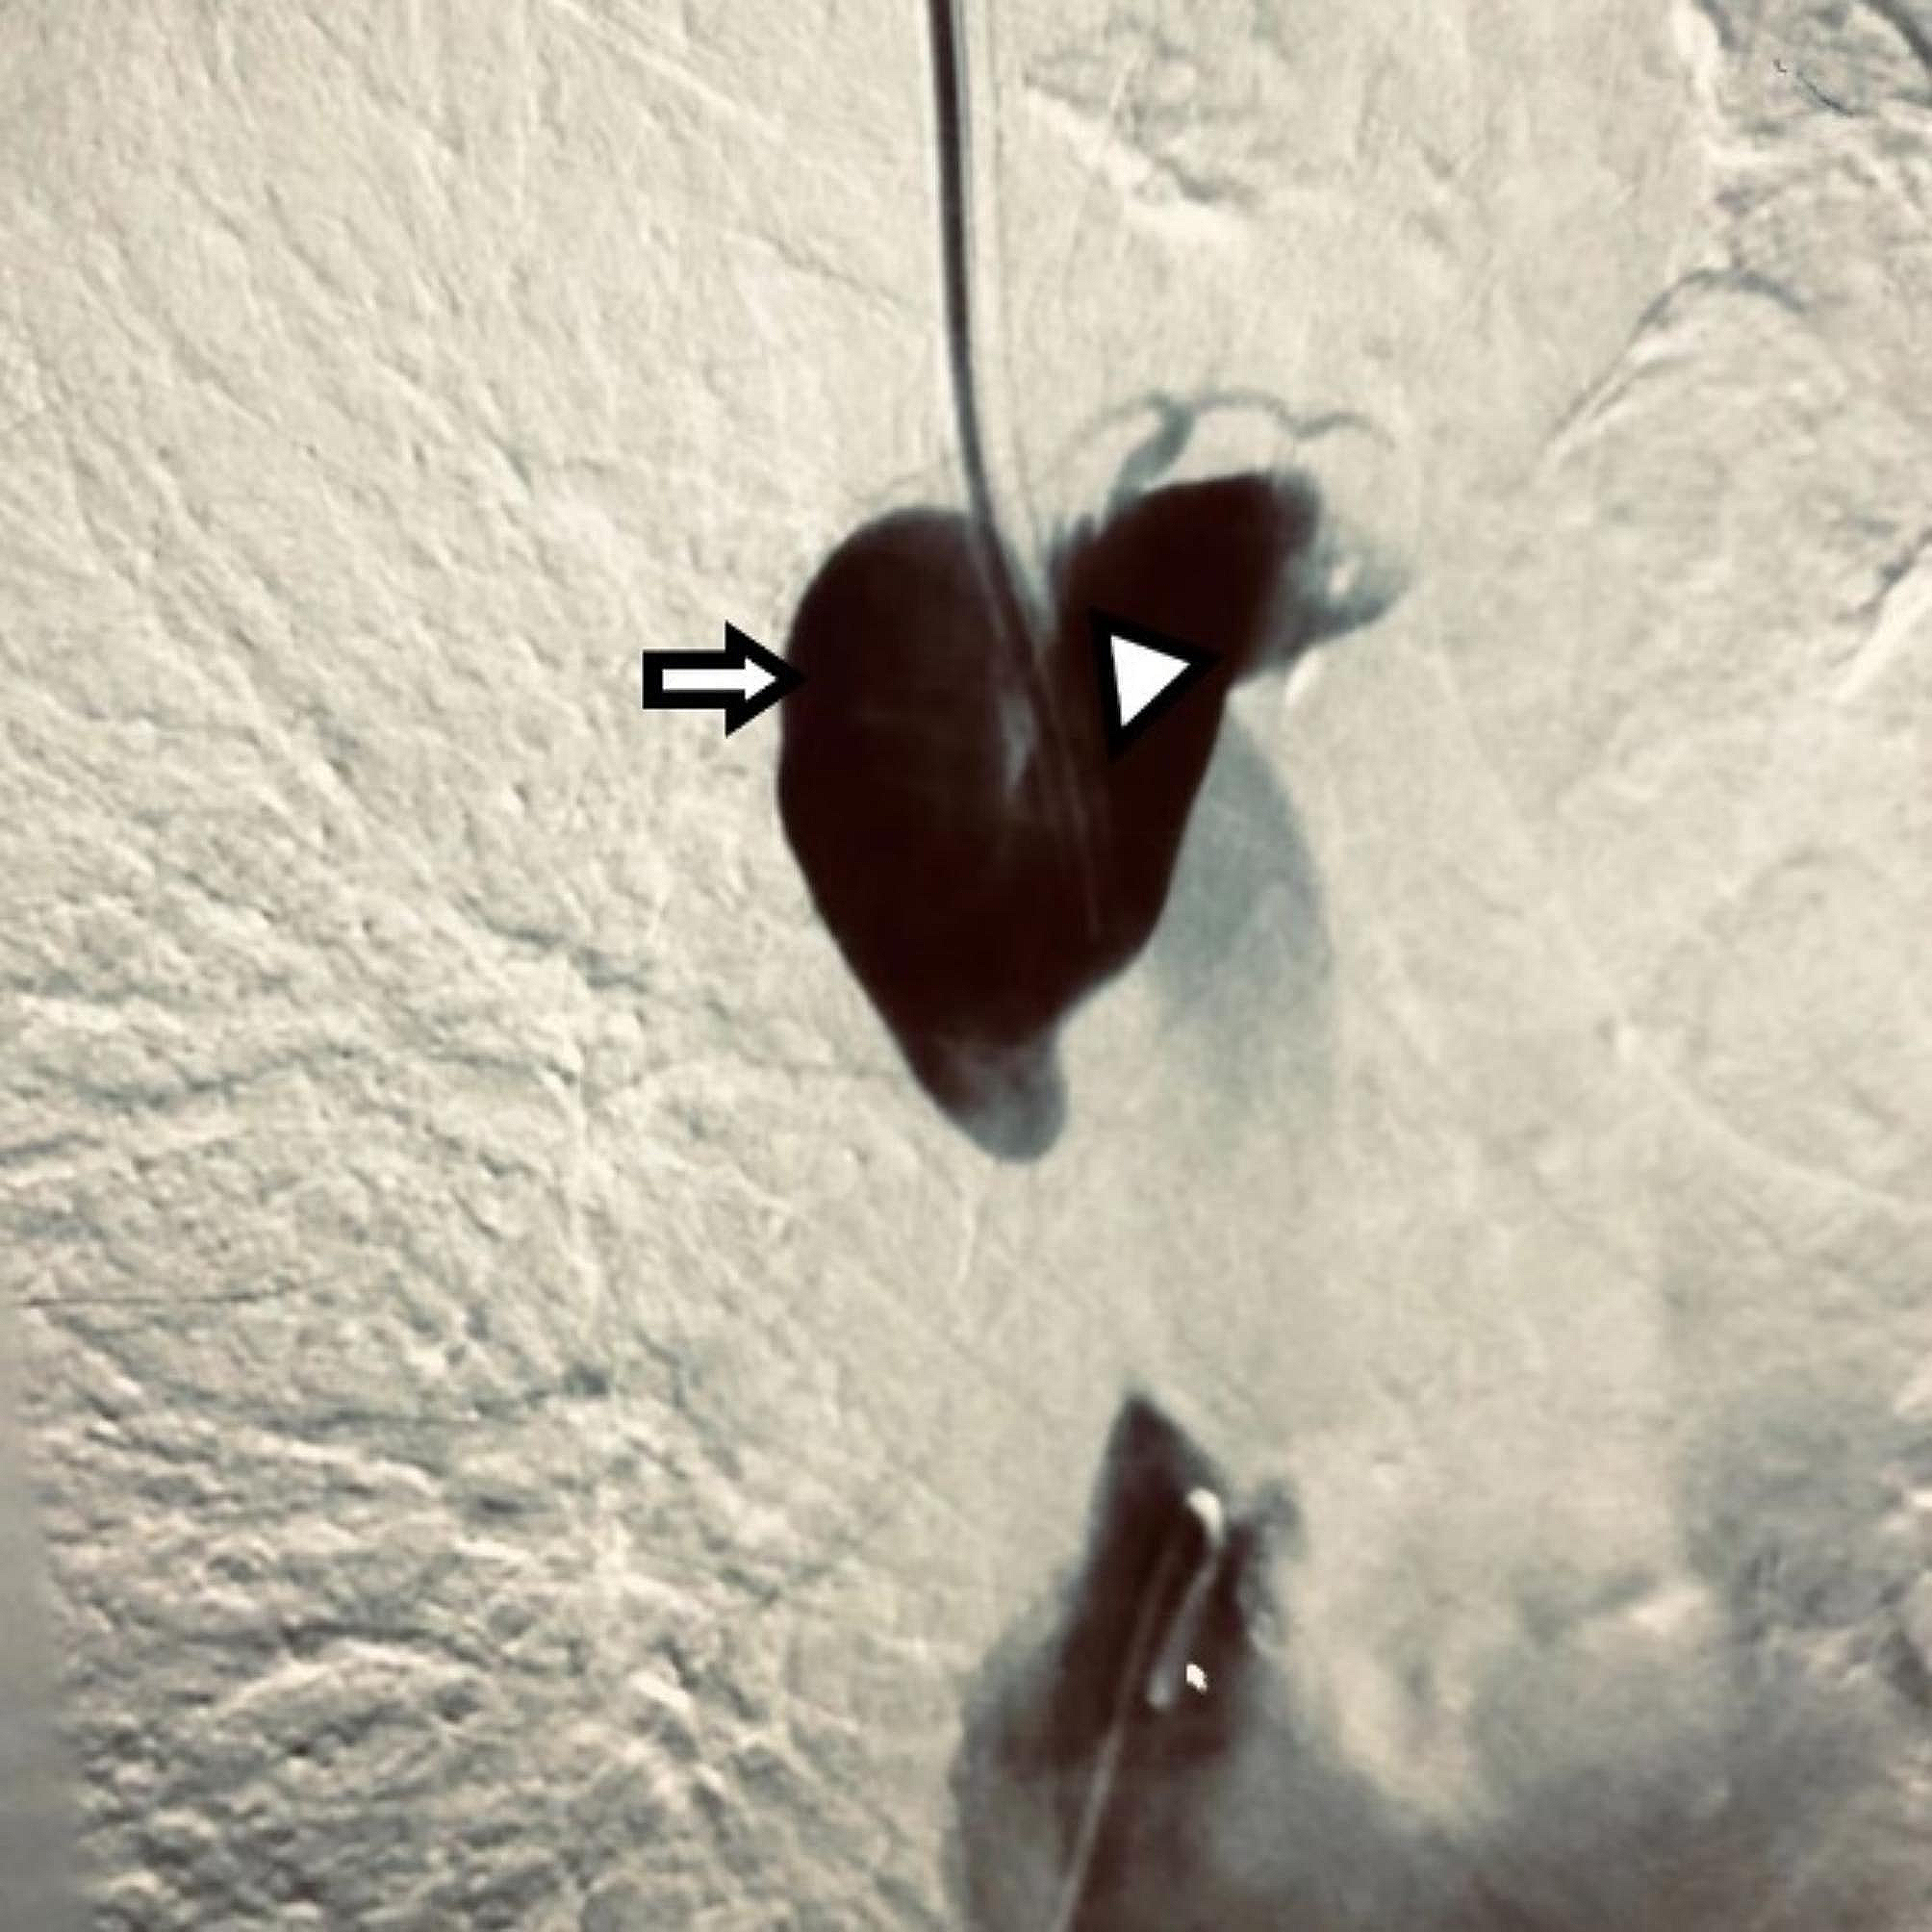 Hemorrhagic pericardial tamponade in a hemodialysis patient with catheter-related superior vena cava syndrome: a case report